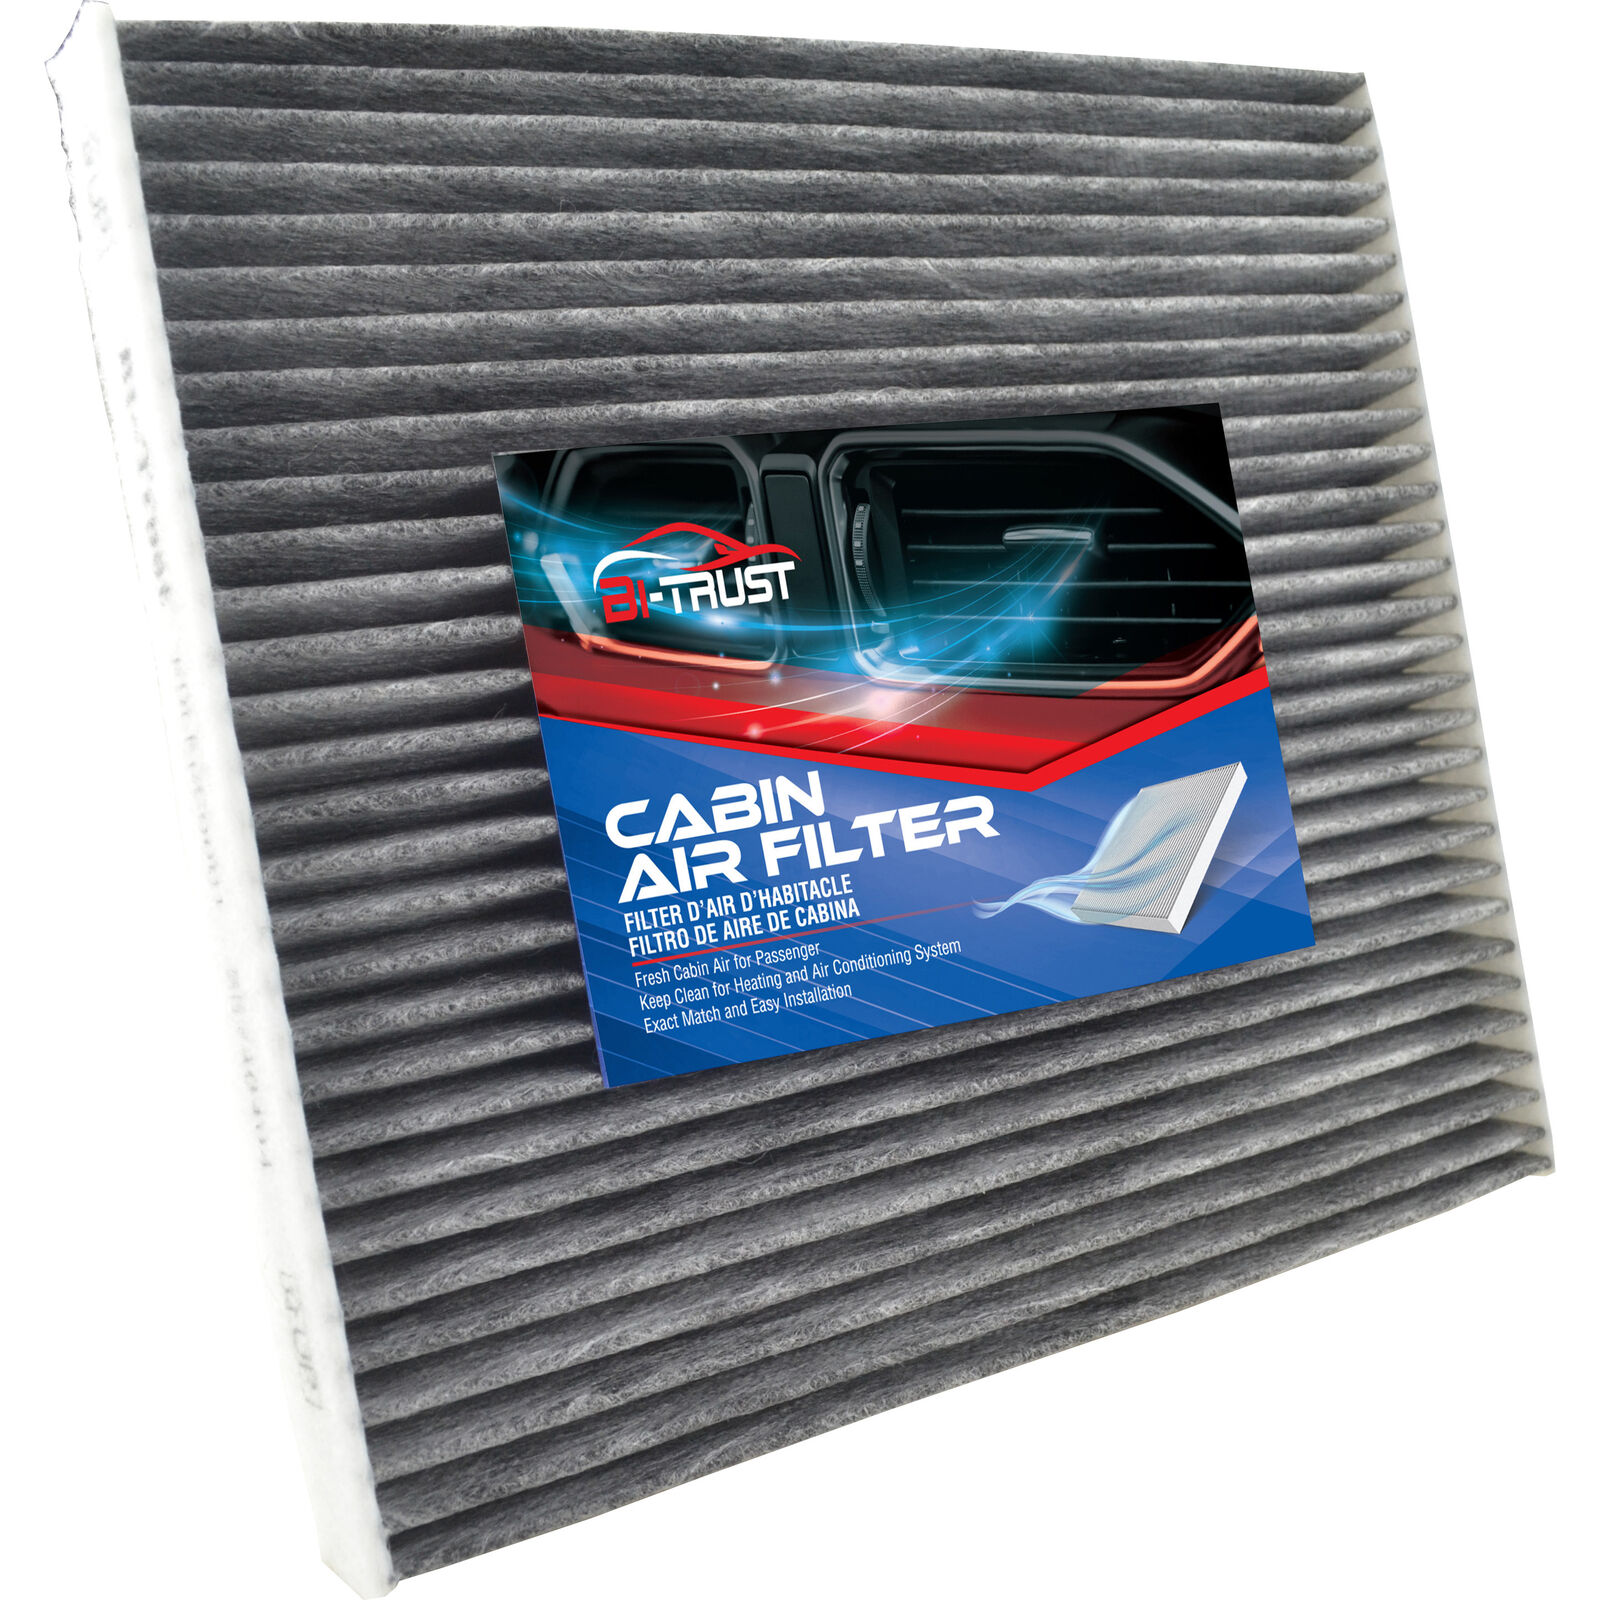 Cabin Air Filter for Cadillac CTS 2004-2013 V6 3.6L STS 2006-2009 V8 4.4L